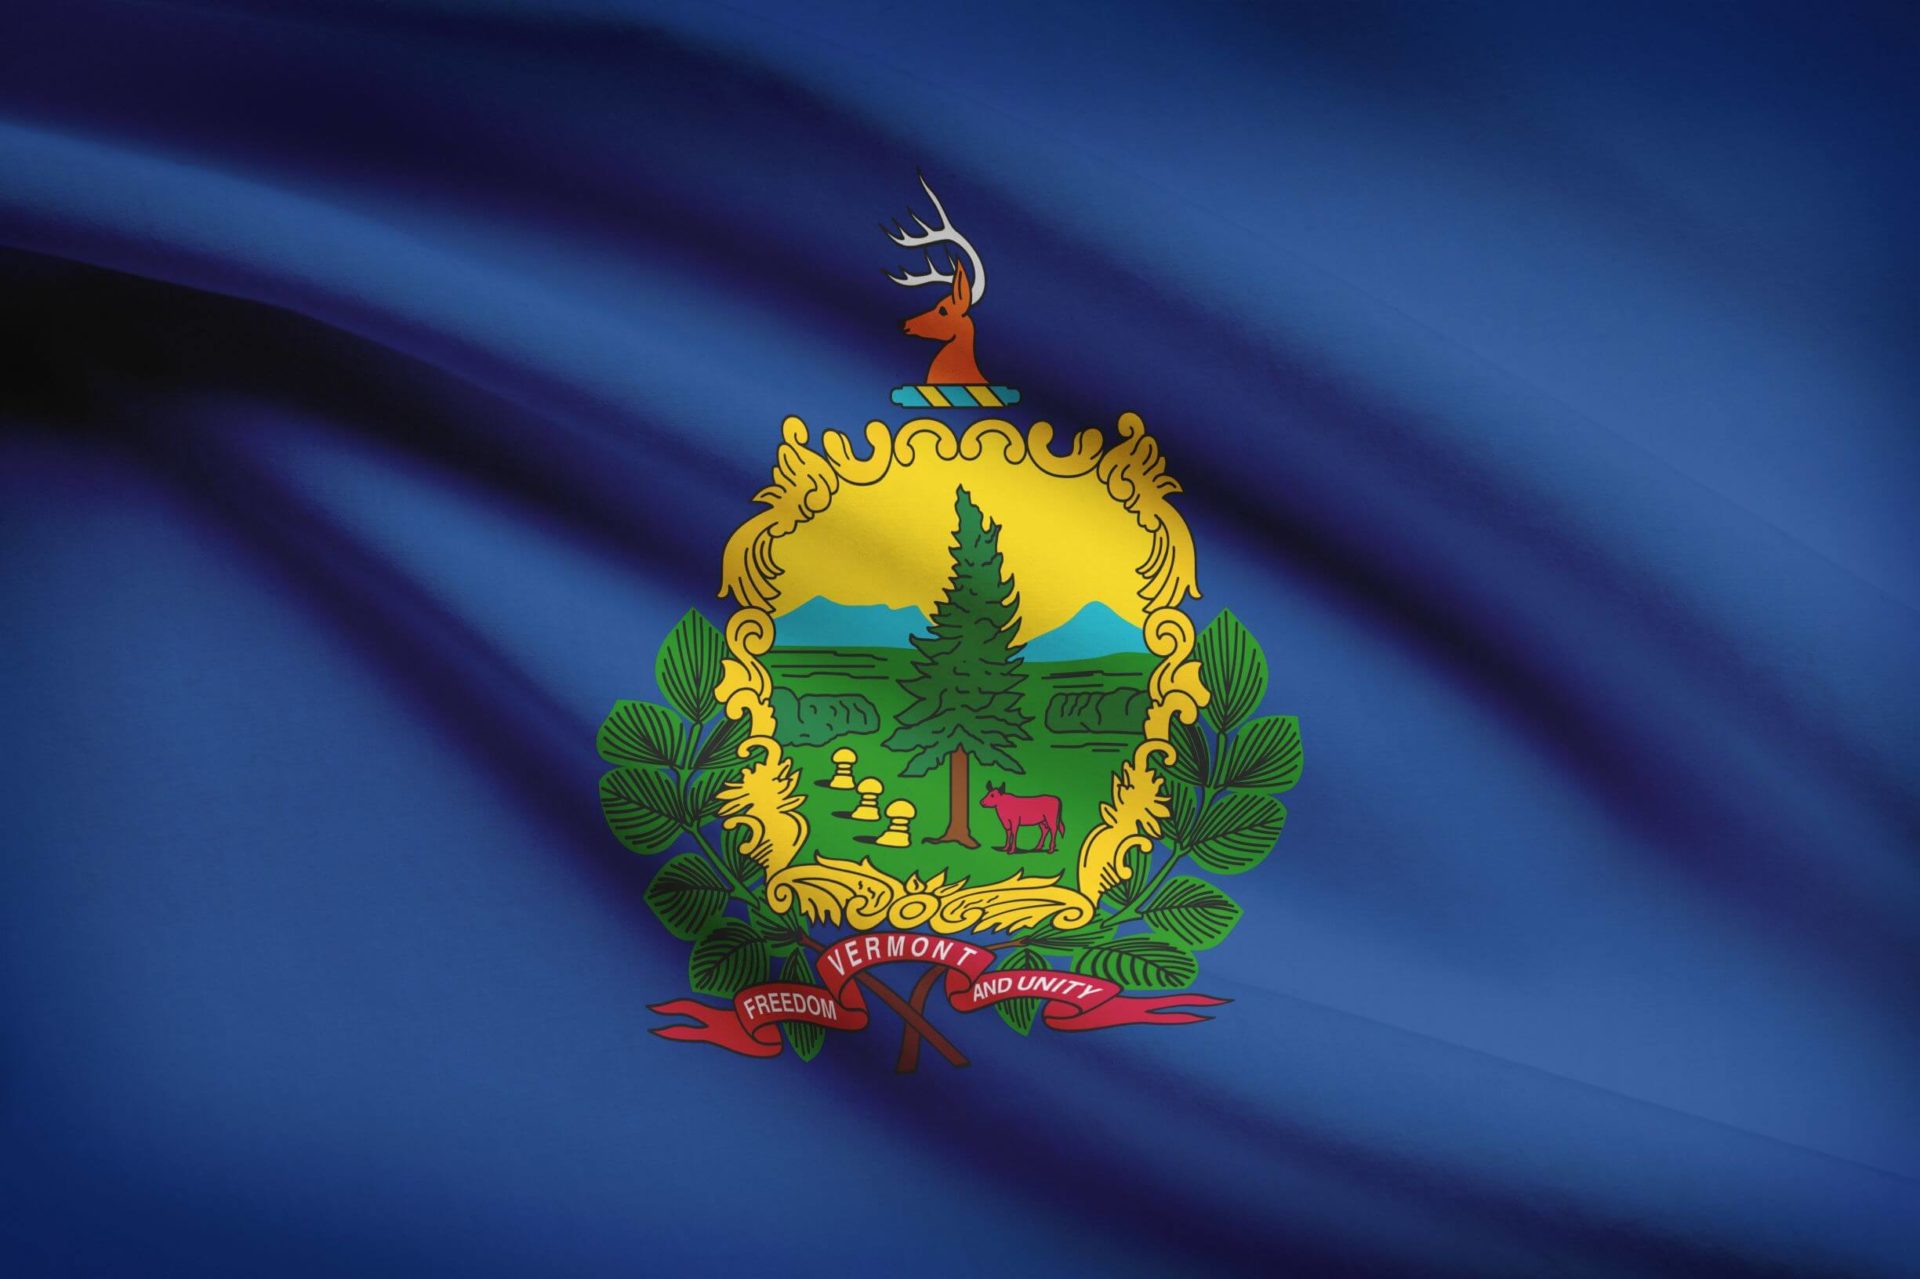 The Vermont state flag.